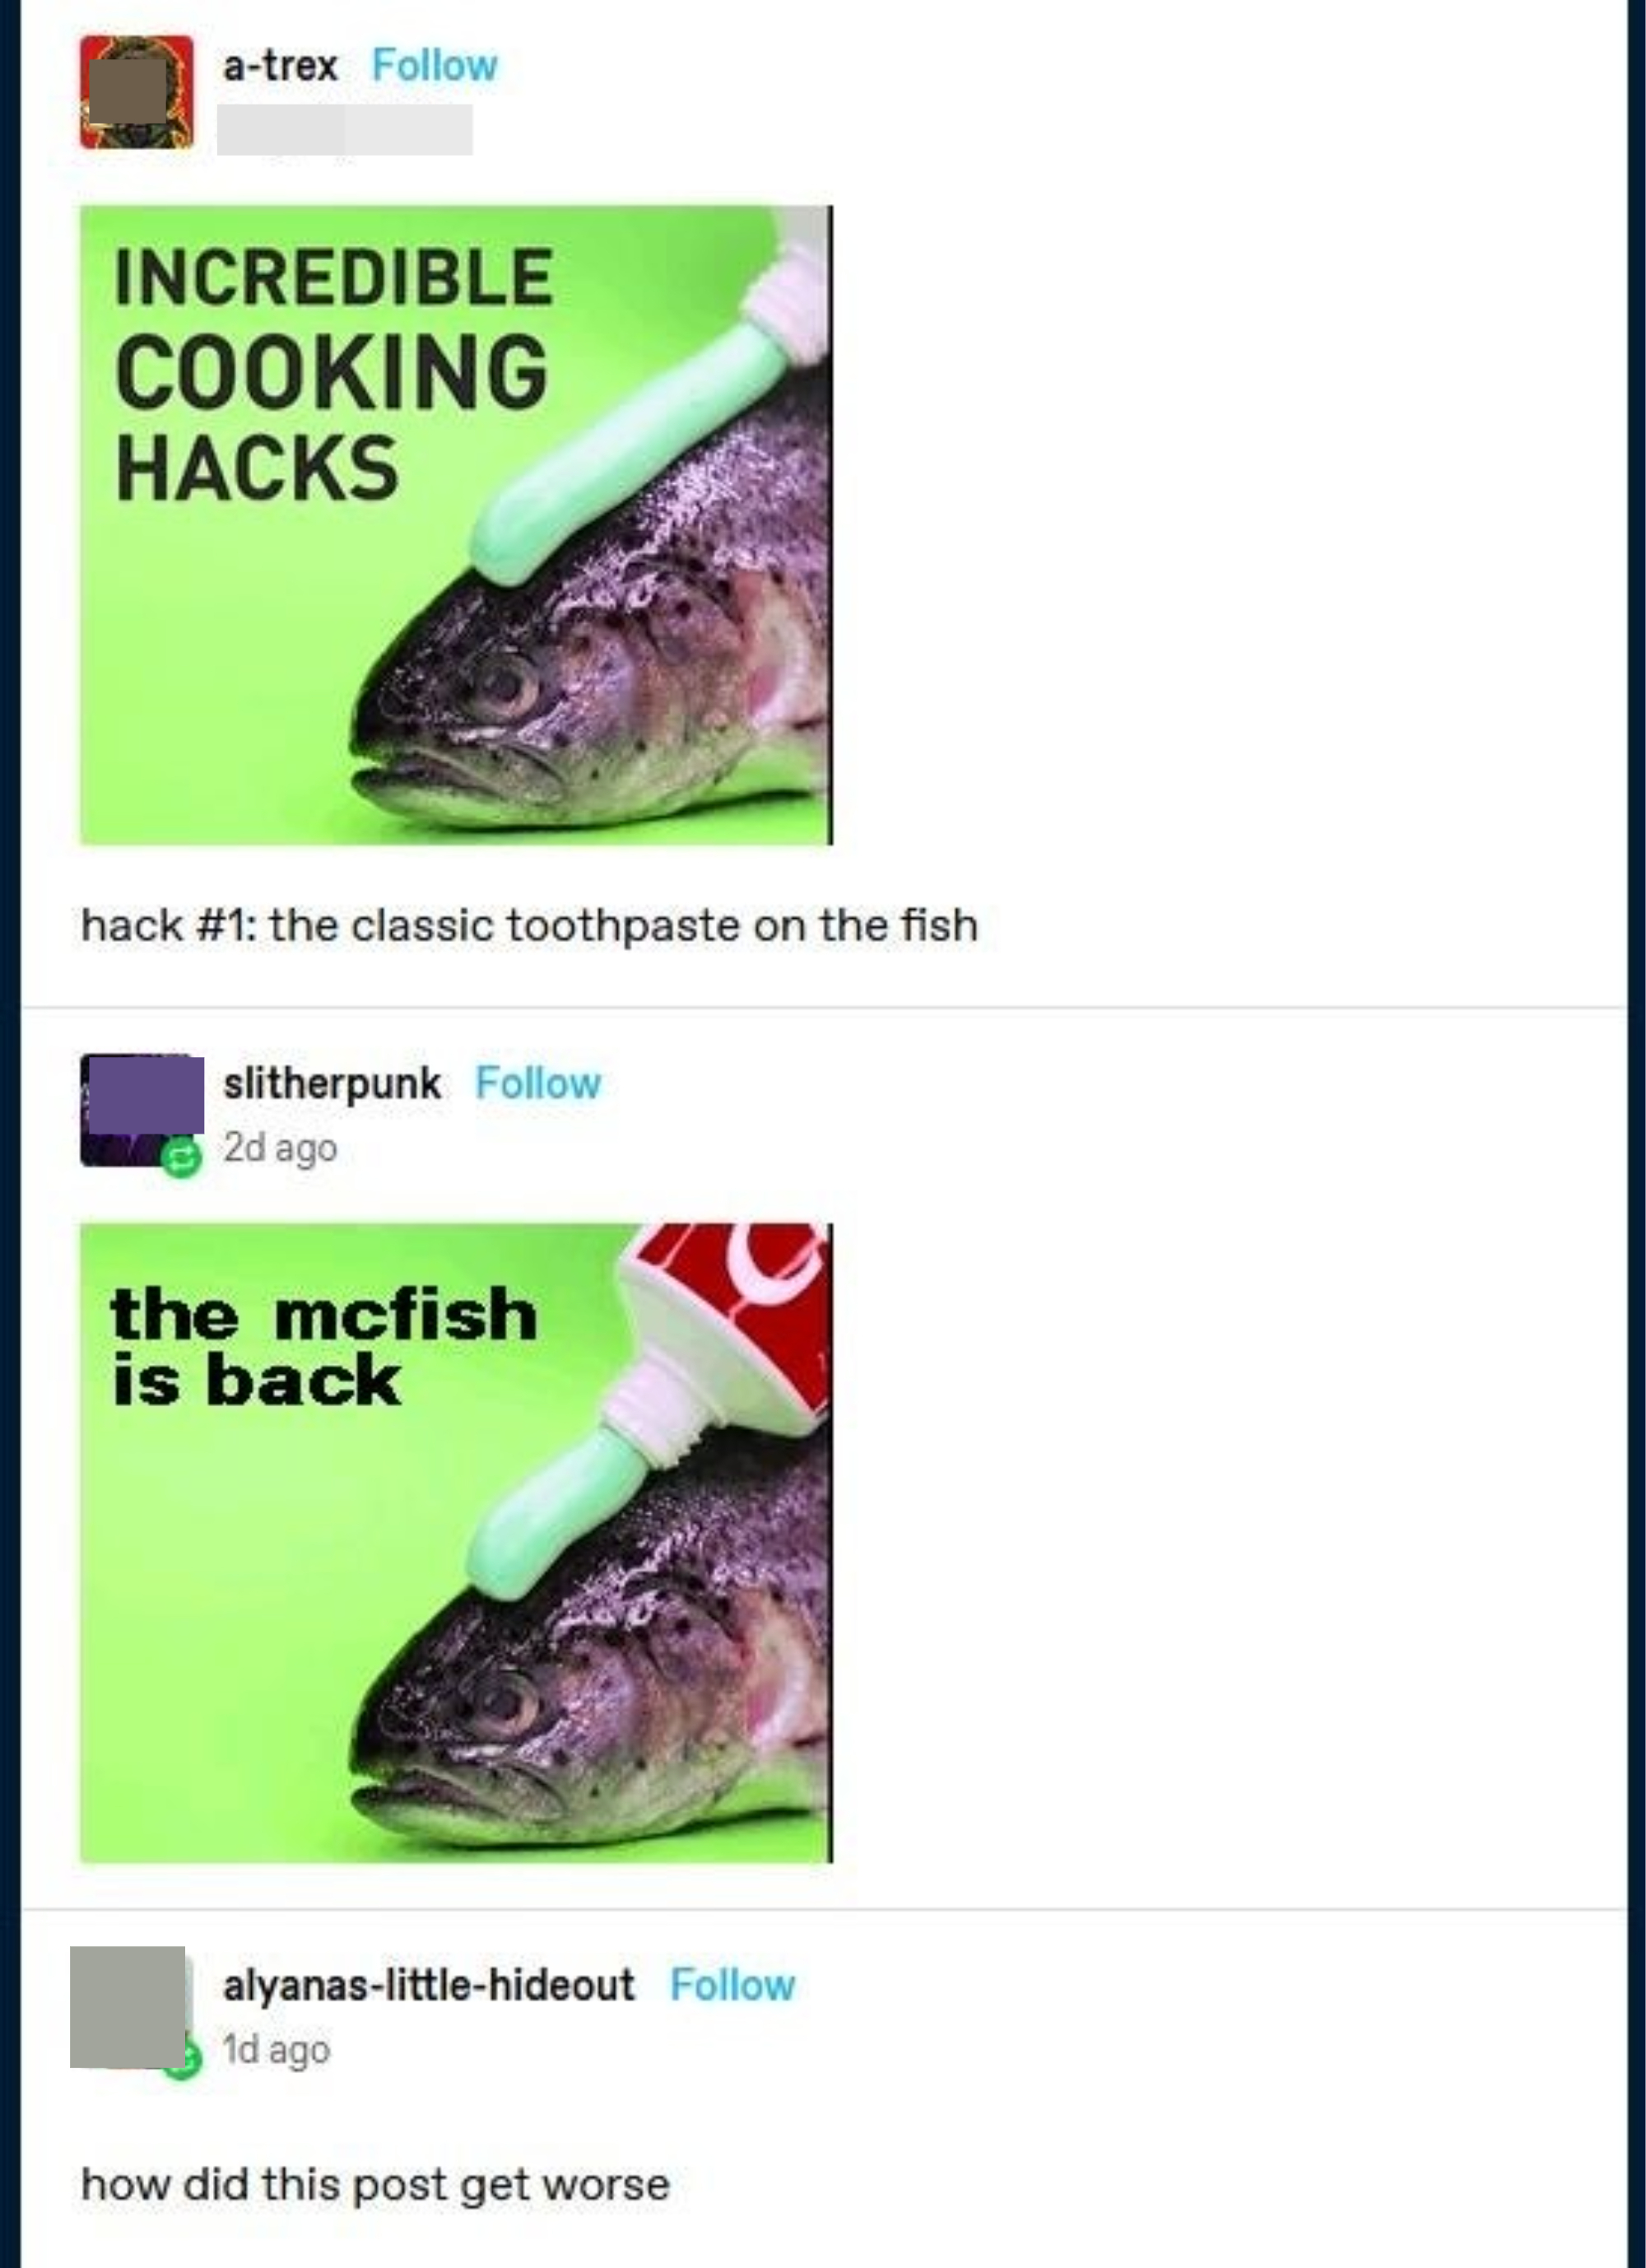 &quot;Incredible cooking hacks&quot; with photo of a fish with what looks like toothpaste gel on its head, with &quot;hack #1: the classic toothpaste on the fish,&quot; and then same image with caption &quot;the mcfish is back&quot; and comment: &quot;how did this post get worse&quot;